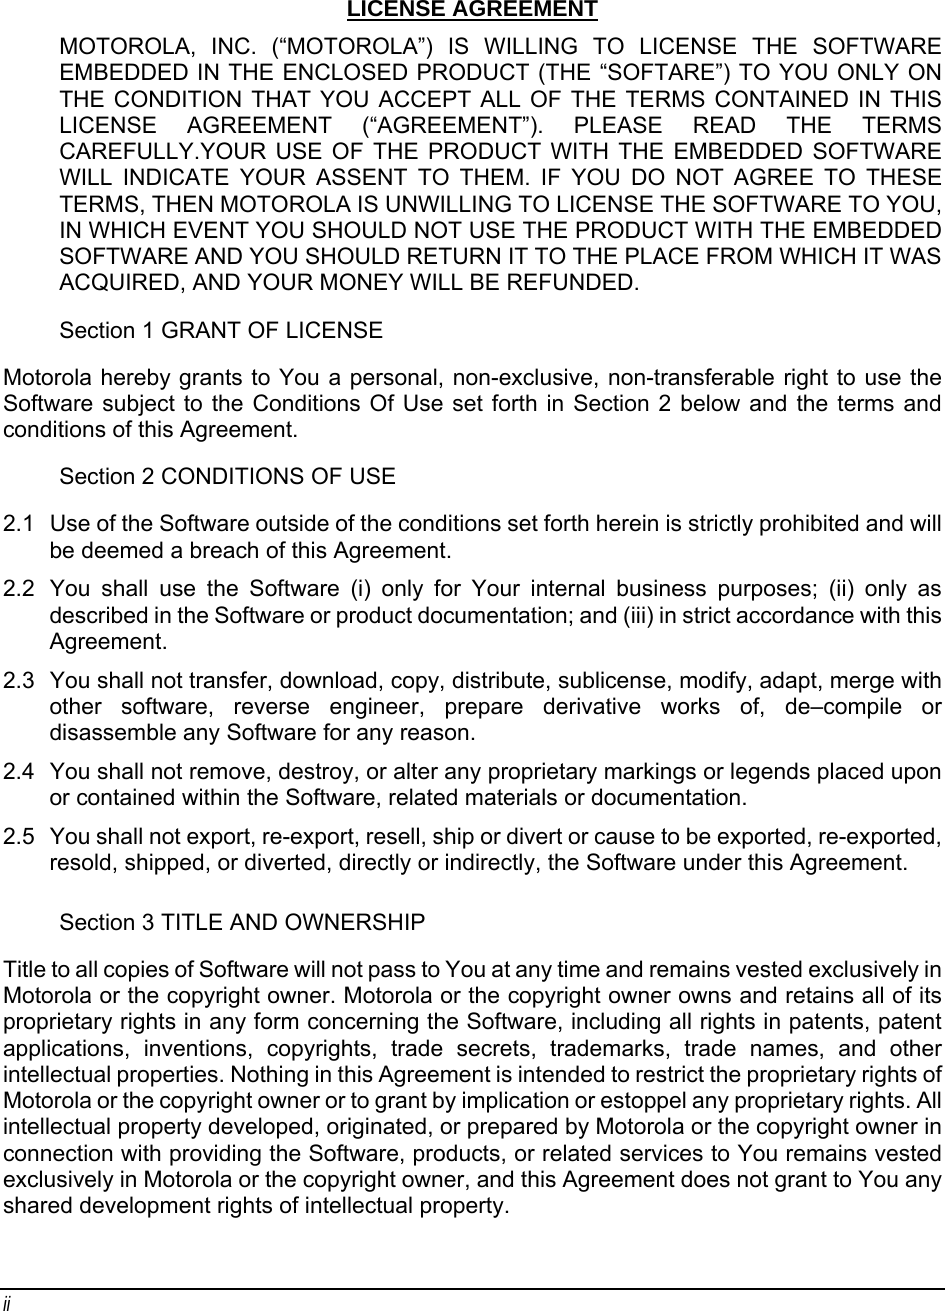 ii  LICENSE AGREEMENT MOTOROLA, INC. (“MOTOROLA”) IS WILLING TO LICENSE THE SOFTWARE EMBEDDED IN THE ENCLOSED PRODUCT (THE “SOFTARE”) TO YOU ONLY ON THE CONDITION THAT YOU ACCEPT ALL OF THE TERMS CONTAINED IN THIS LICENSE AGREEMENT (“AGREEMENT”). PLEASE READ THE TERMS CAREFULLY.YOUR USE OF THE PRODUCT WITH THE EMBEDDED SOFTWARE WILL INDICATE YOUR ASSENT TO THEM. IF YOU DO NOT AGREE TO THESE TERMS, THEN MOTOROLA IS UNWILLING TO LICENSE THE SOFTWARE TO YOU, IN WHICH EVENT YOU SHOULD NOT USE THE PRODUCT WITH THE EMBEDDED SOFTWARE AND YOU SHOULD RETURN IT TO THE PLACE FROM WHICH IT WAS ACQUIRED, AND YOUR MONEY WILL BE REFUNDED. Section 1 GRANT OF LICENSE Motorola hereby grants to You a personal, non-exclusive, non-transferable right to use the Software subject to the Conditions Of Use set forth in Section 2 below and the terms and conditions of this Agreement. Section 2 CONDITIONS OF USE 2.1  Use of the Software outside of the conditions set forth herein is strictly prohibited and will be deemed a breach of this Agreement. 2.2  You shall use the Software (i) only for Your internal business purposes; (ii) only as described in the Software or product documentation; and (iii) in strict accordance with this Agreement. 2.3  You shall not transfer, download, copy, distribute, sublicense, modify, adapt, merge with other software, reverse engineer, prepare derivative works of, de–compile or disassemble any Software for any reason. 2.4  You shall not remove, destroy, or alter any proprietary markings or legends placed upon or contained within the Software, related materials or documentation. 2.5  You shall not export, re-export, resell, ship or divert or cause to be exported, re-exported, resold, shipped, or diverted, directly or indirectly, the Software under this Agreement. Section 3 TITLE AND OWNERSHIP Title to all copies of Software will not pass to You at any time and remains vested exclusively in Motorola or the copyright owner. Motorola or the copyright owner owns and retains all of its proprietary rights in any form concerning the Software, including all rights in patents, patent applications, inventions, copyrights, trade secrets, trademarks, trade names, and other intellectual properties. Nothing in this Agreement is intended to restrict the proprietary rights of Motorola or the copyright owner or to grant by implication or estoppel any proprietary rights. All intellectual property developed, originated, or prepared by Motorola or the copyright owner in connection with providing the Software, products, or related services to You remains vested exclusively in Motorola or the copyright owner, and this Agreement does not grant to You any shared development rights of intellectual property.   